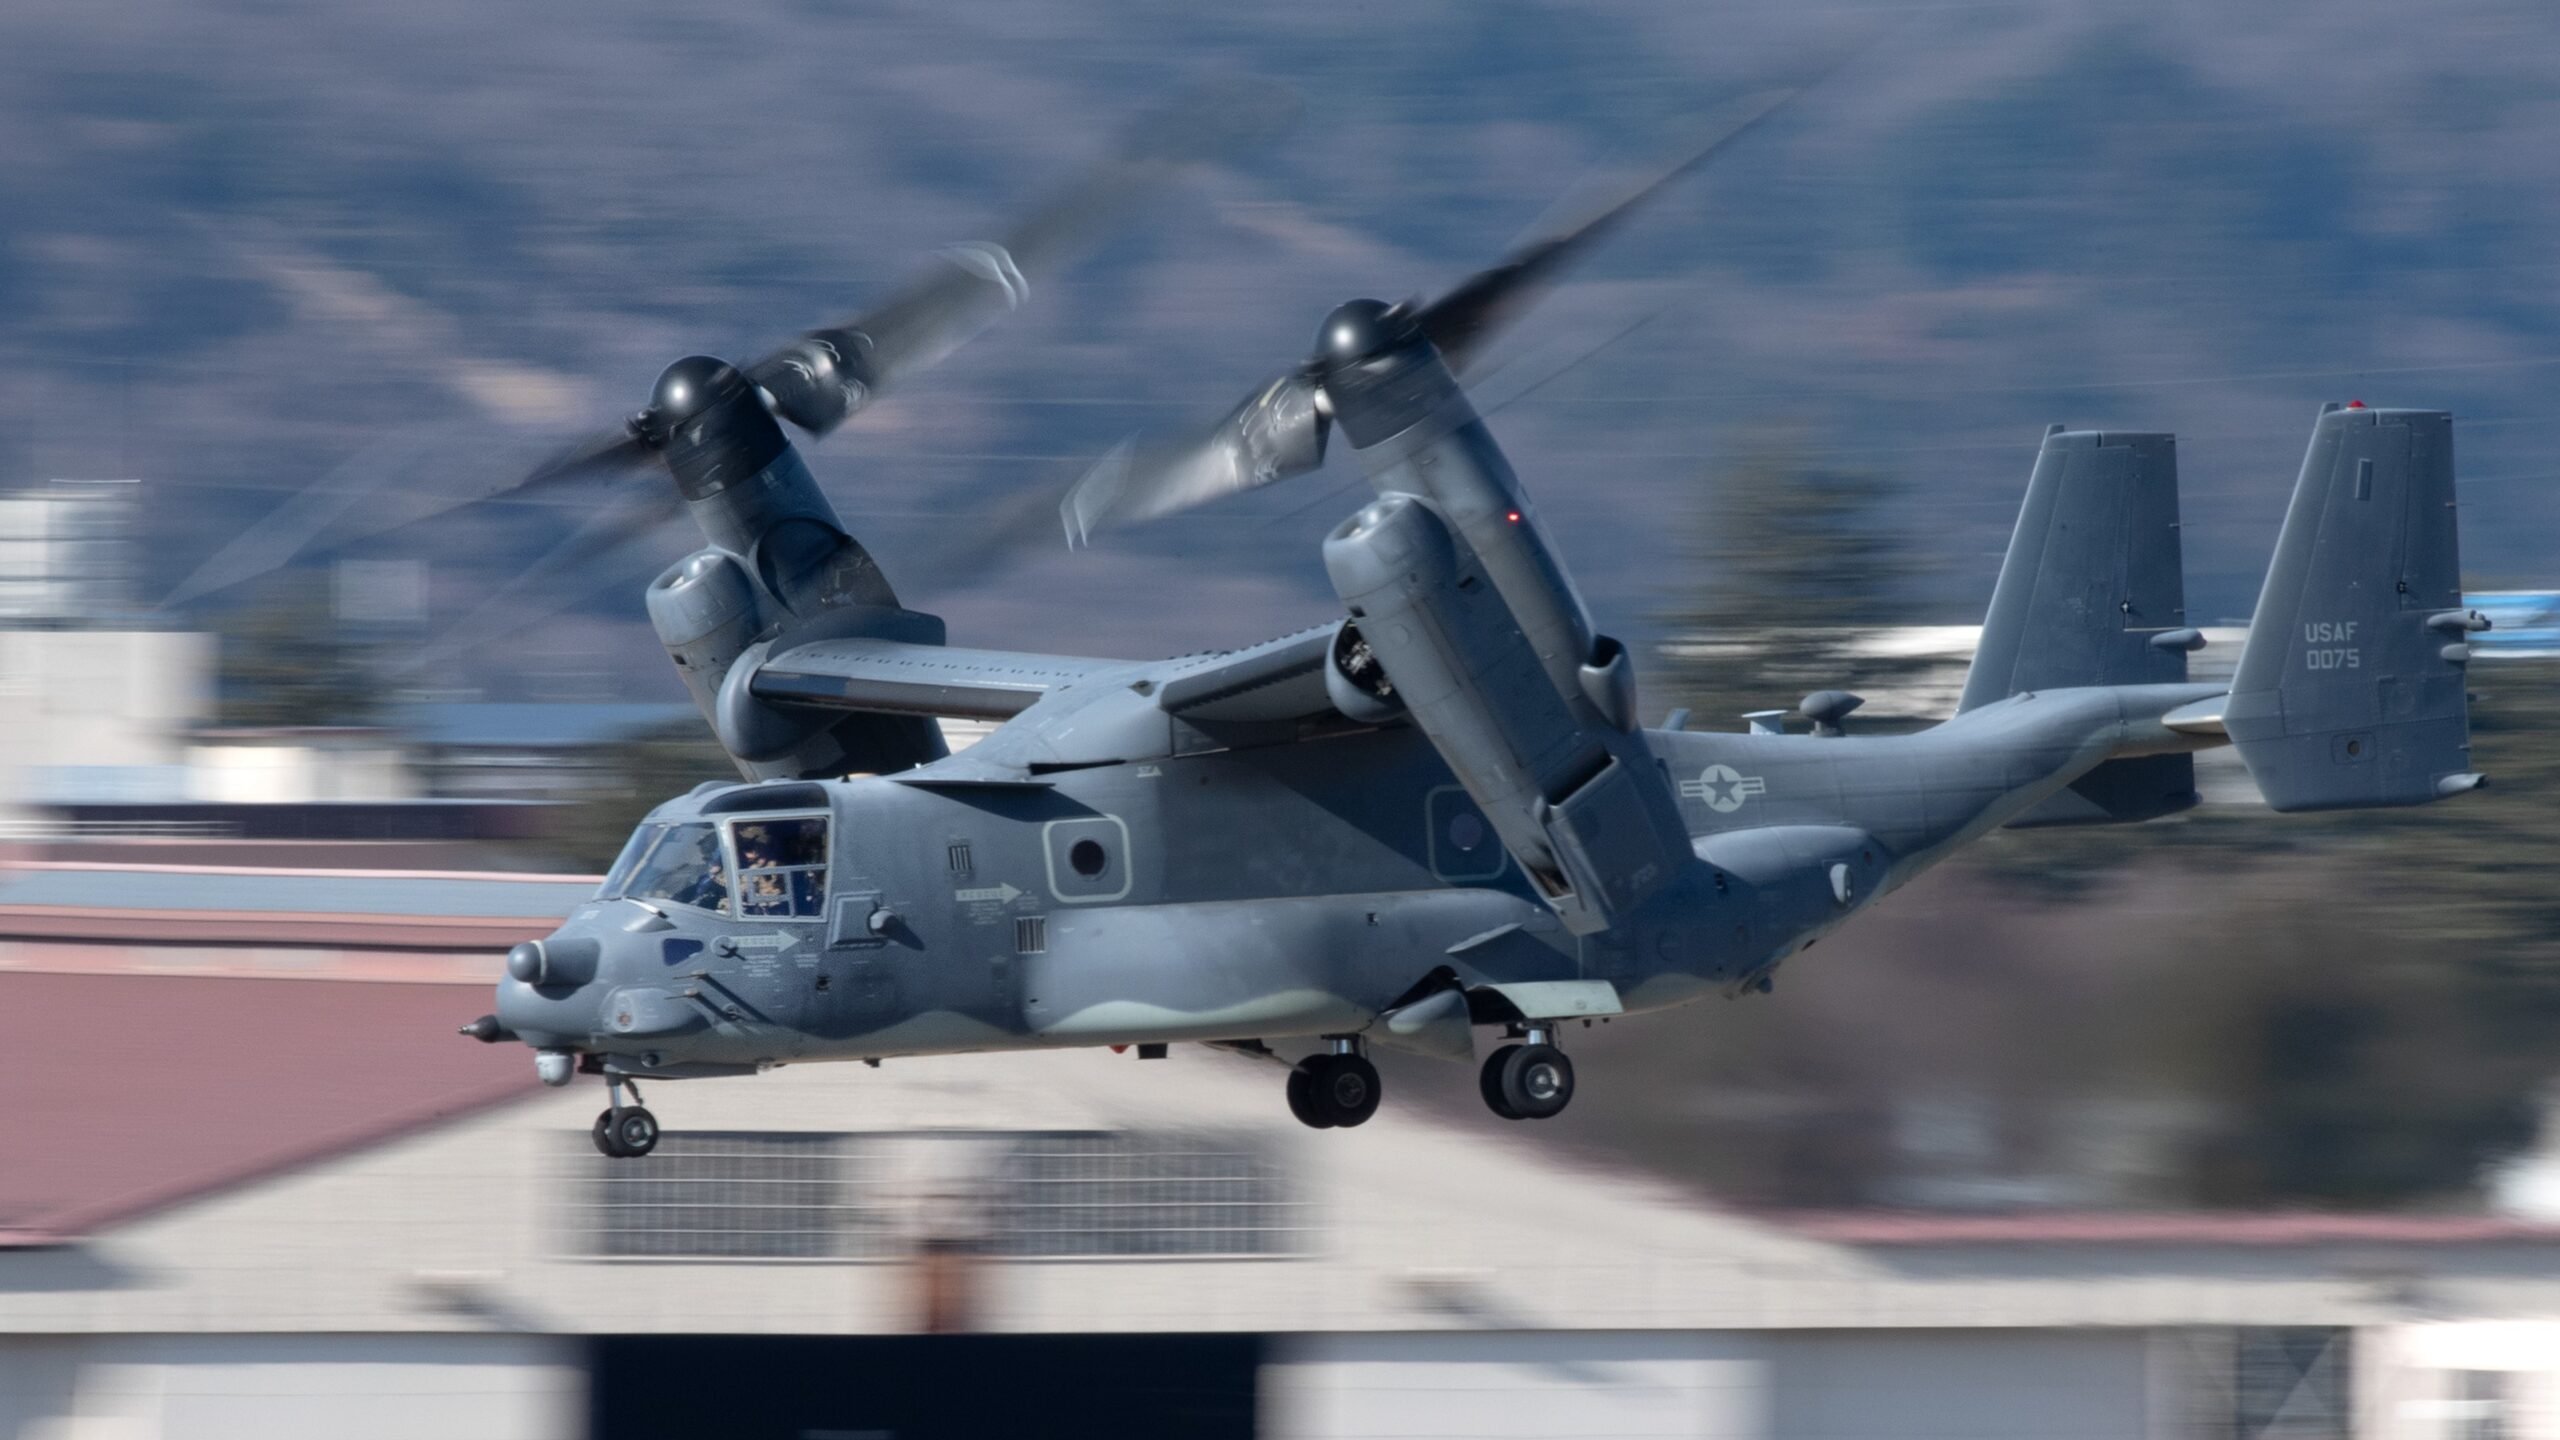 Japan grounds its V-22 Ospreys, calls for US to ground theirs after fatal crash off Japanese island